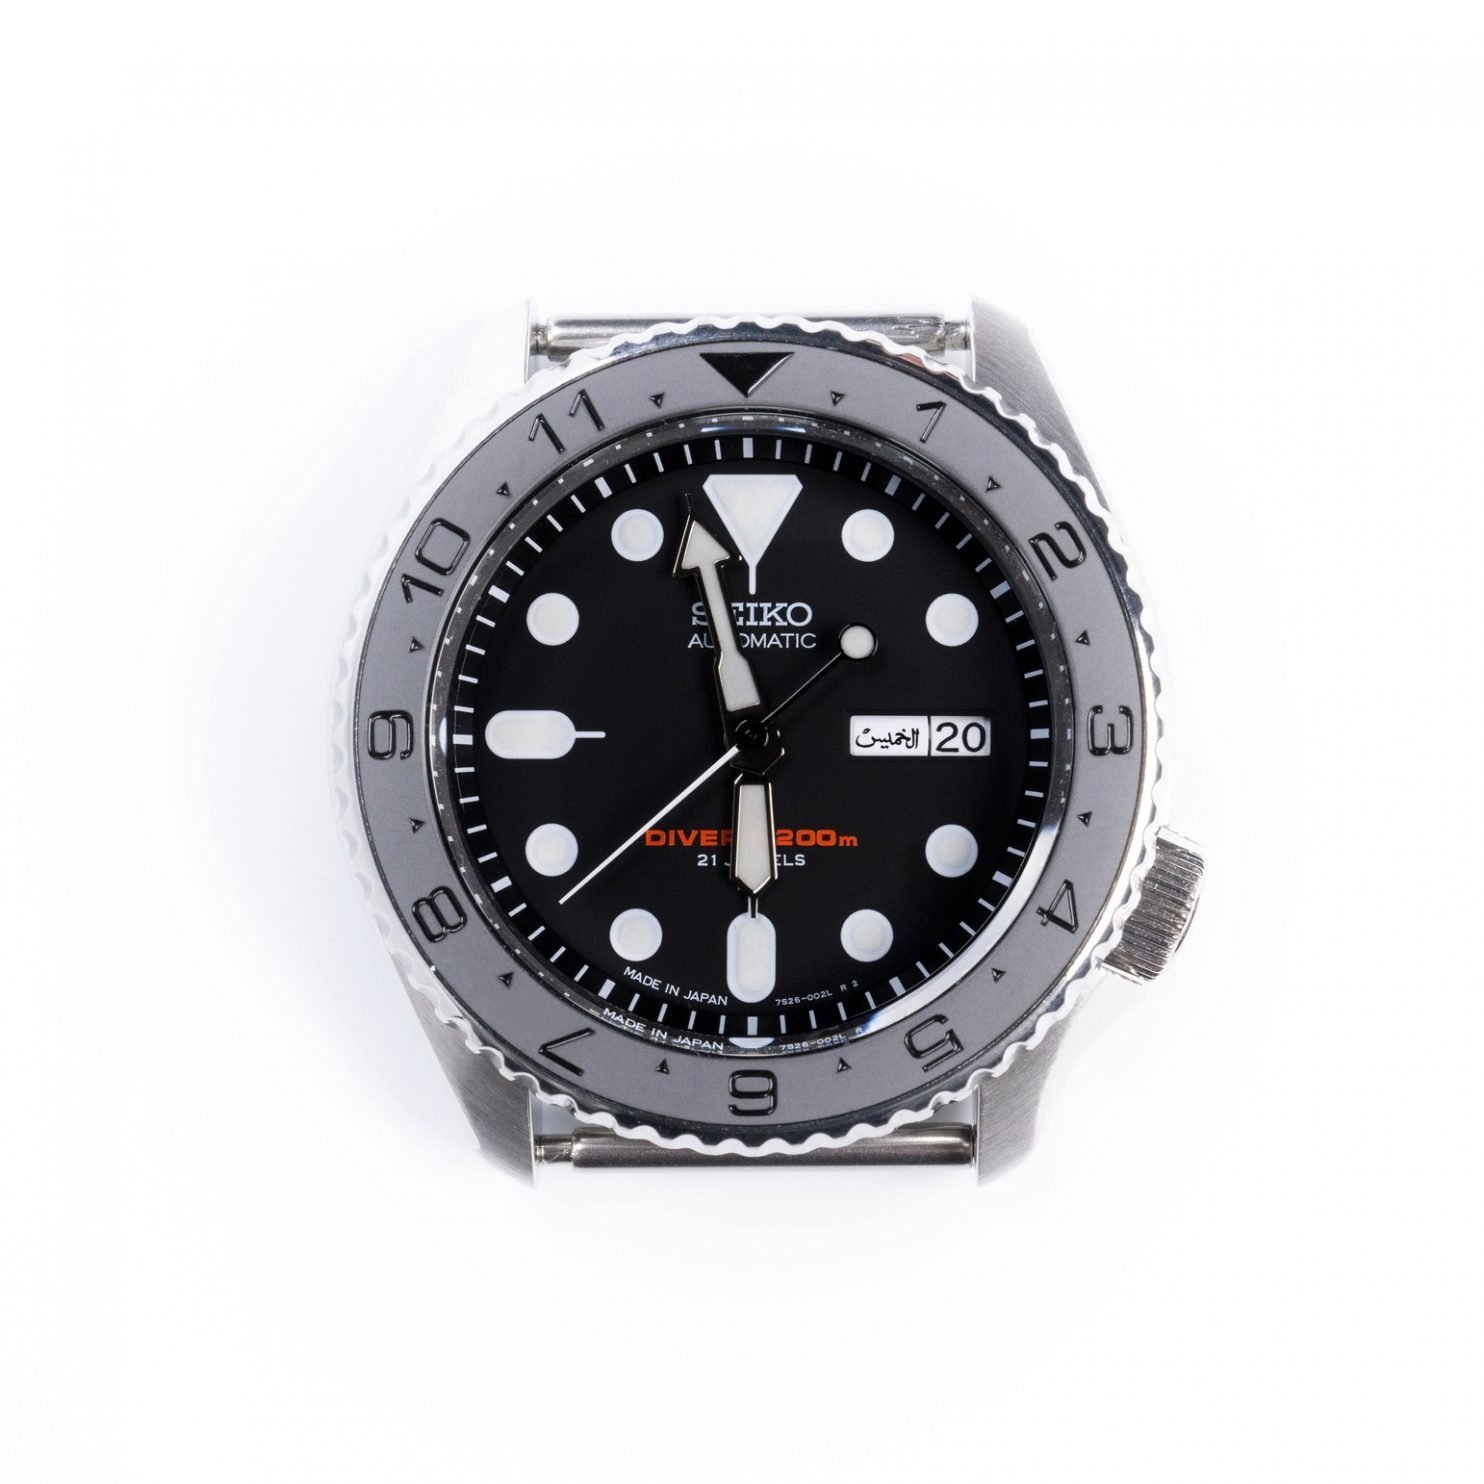 3 Reasons the Seiko SKX Watch is all you'll ever need - Crystaltimes USA  Seiko Modding